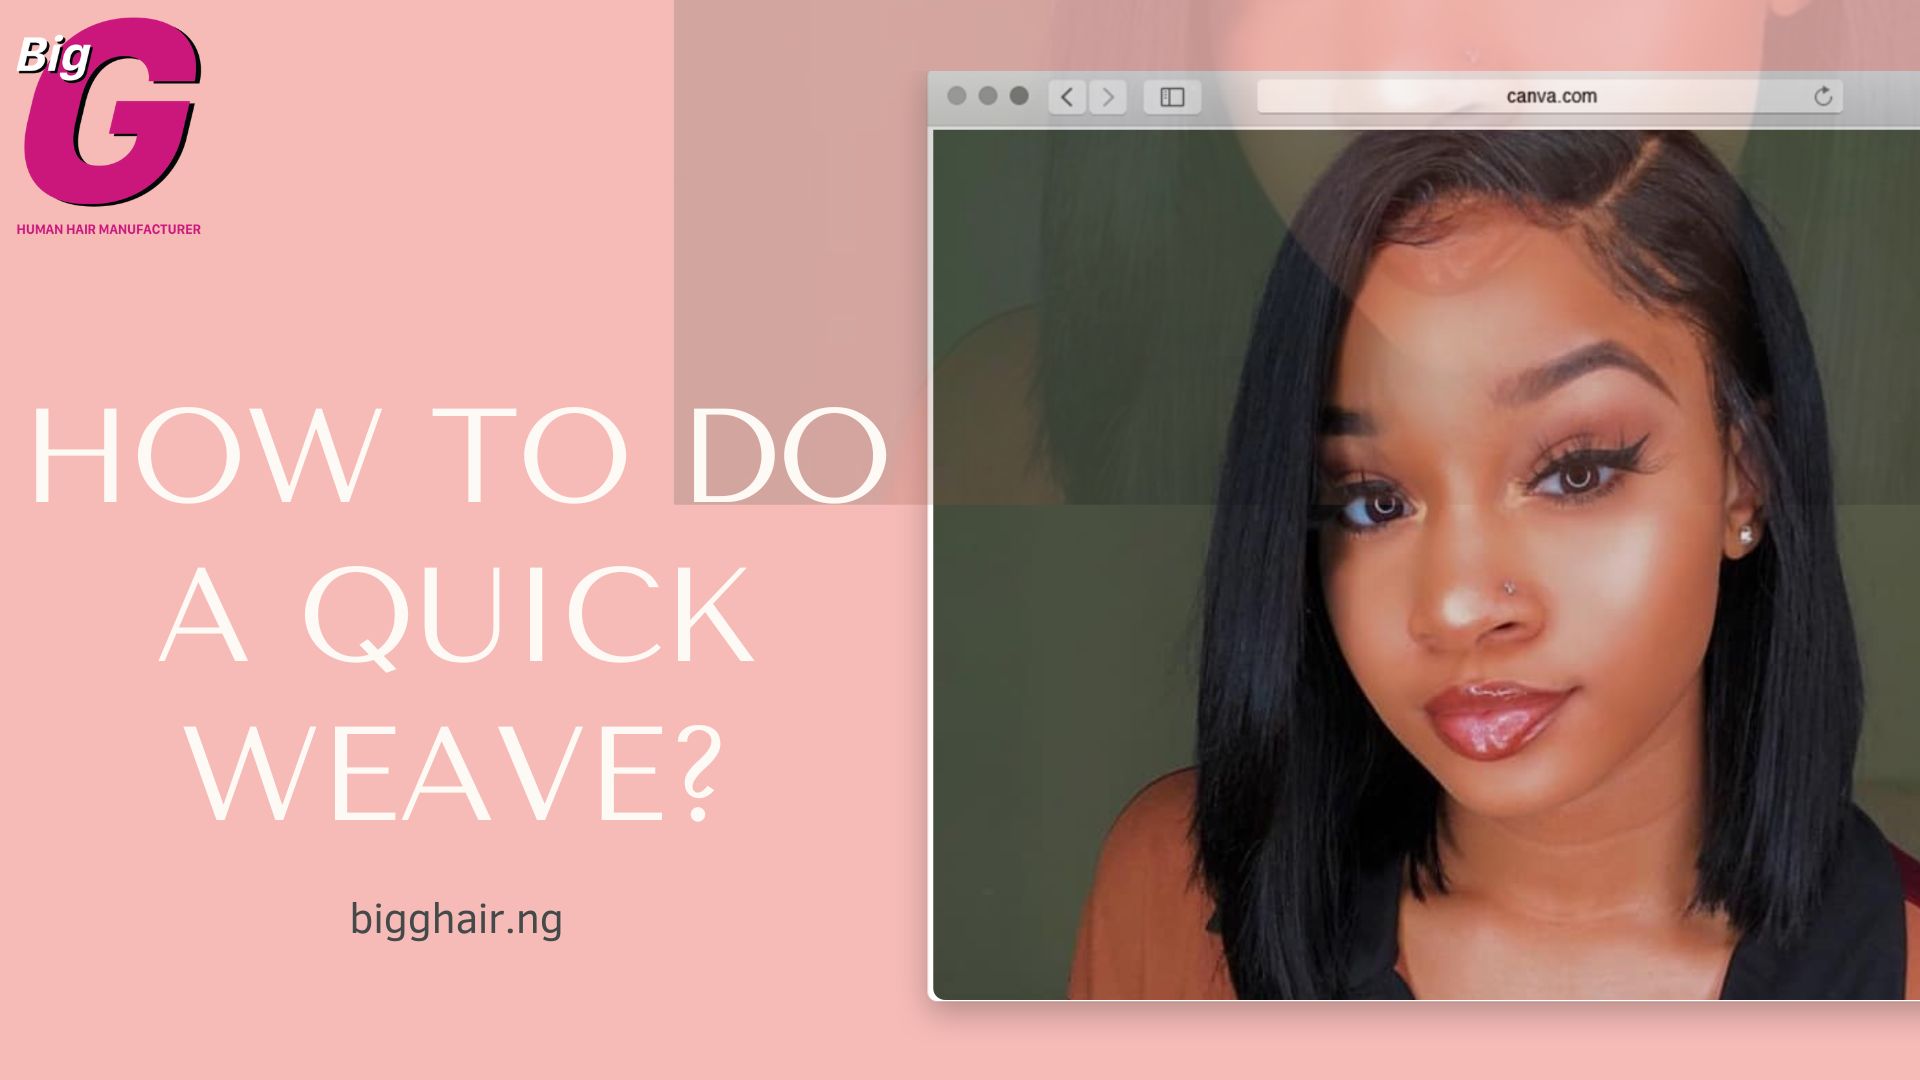 Short Hair Transformation----Liquid Cap Quick weave with a fro